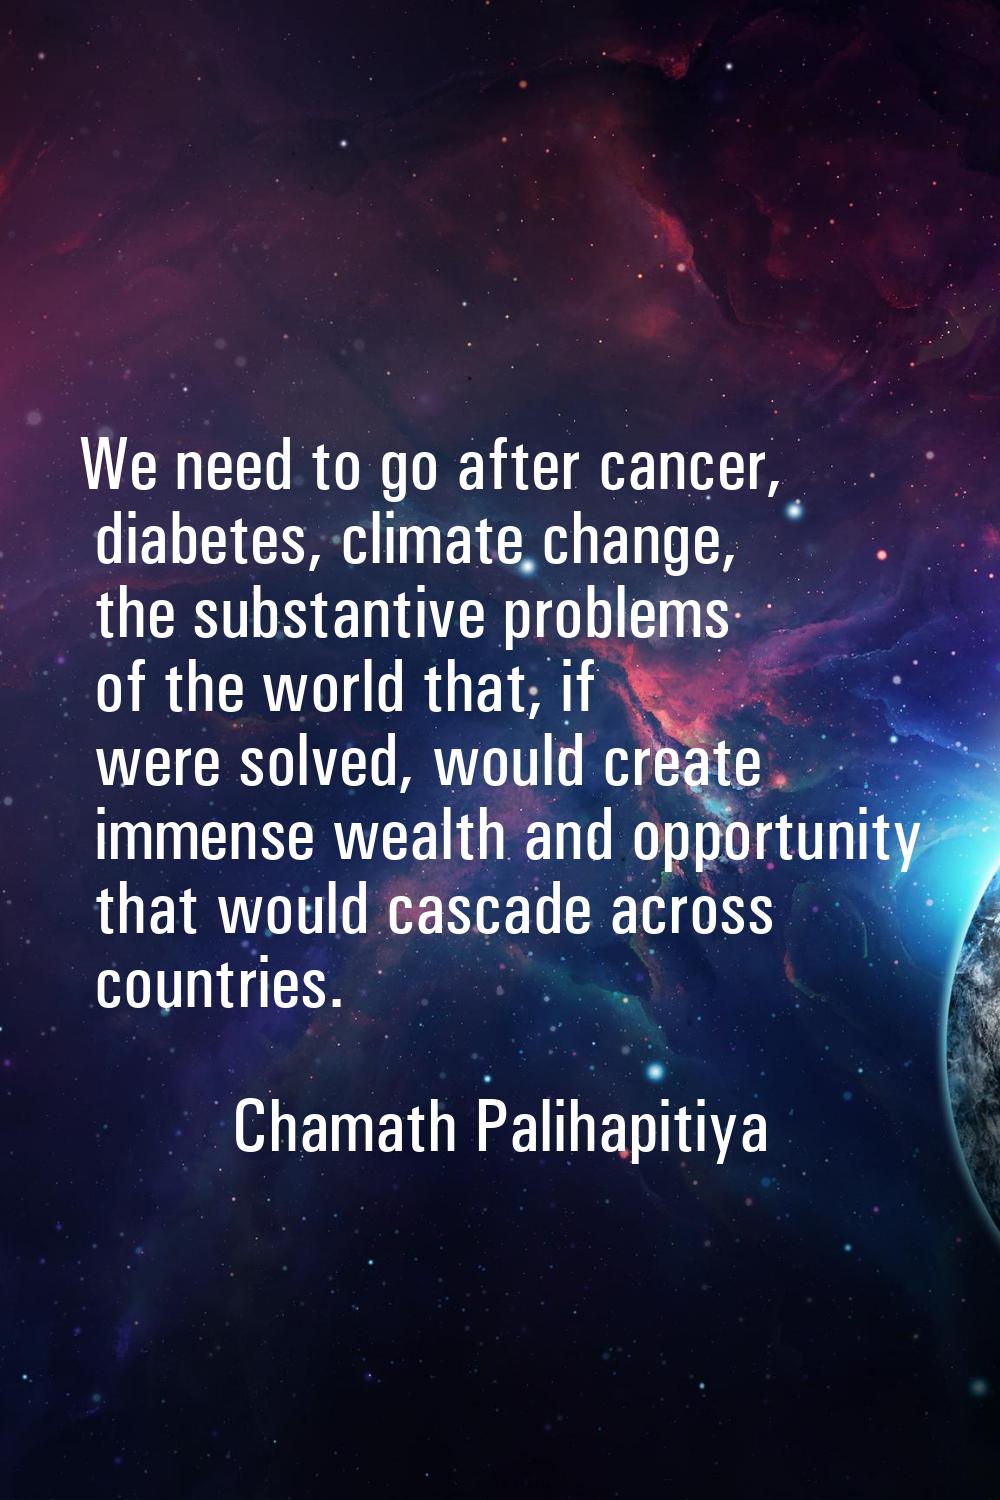 We need to go after cancer, diabetes, climate change, the substantive problems of the world that, i